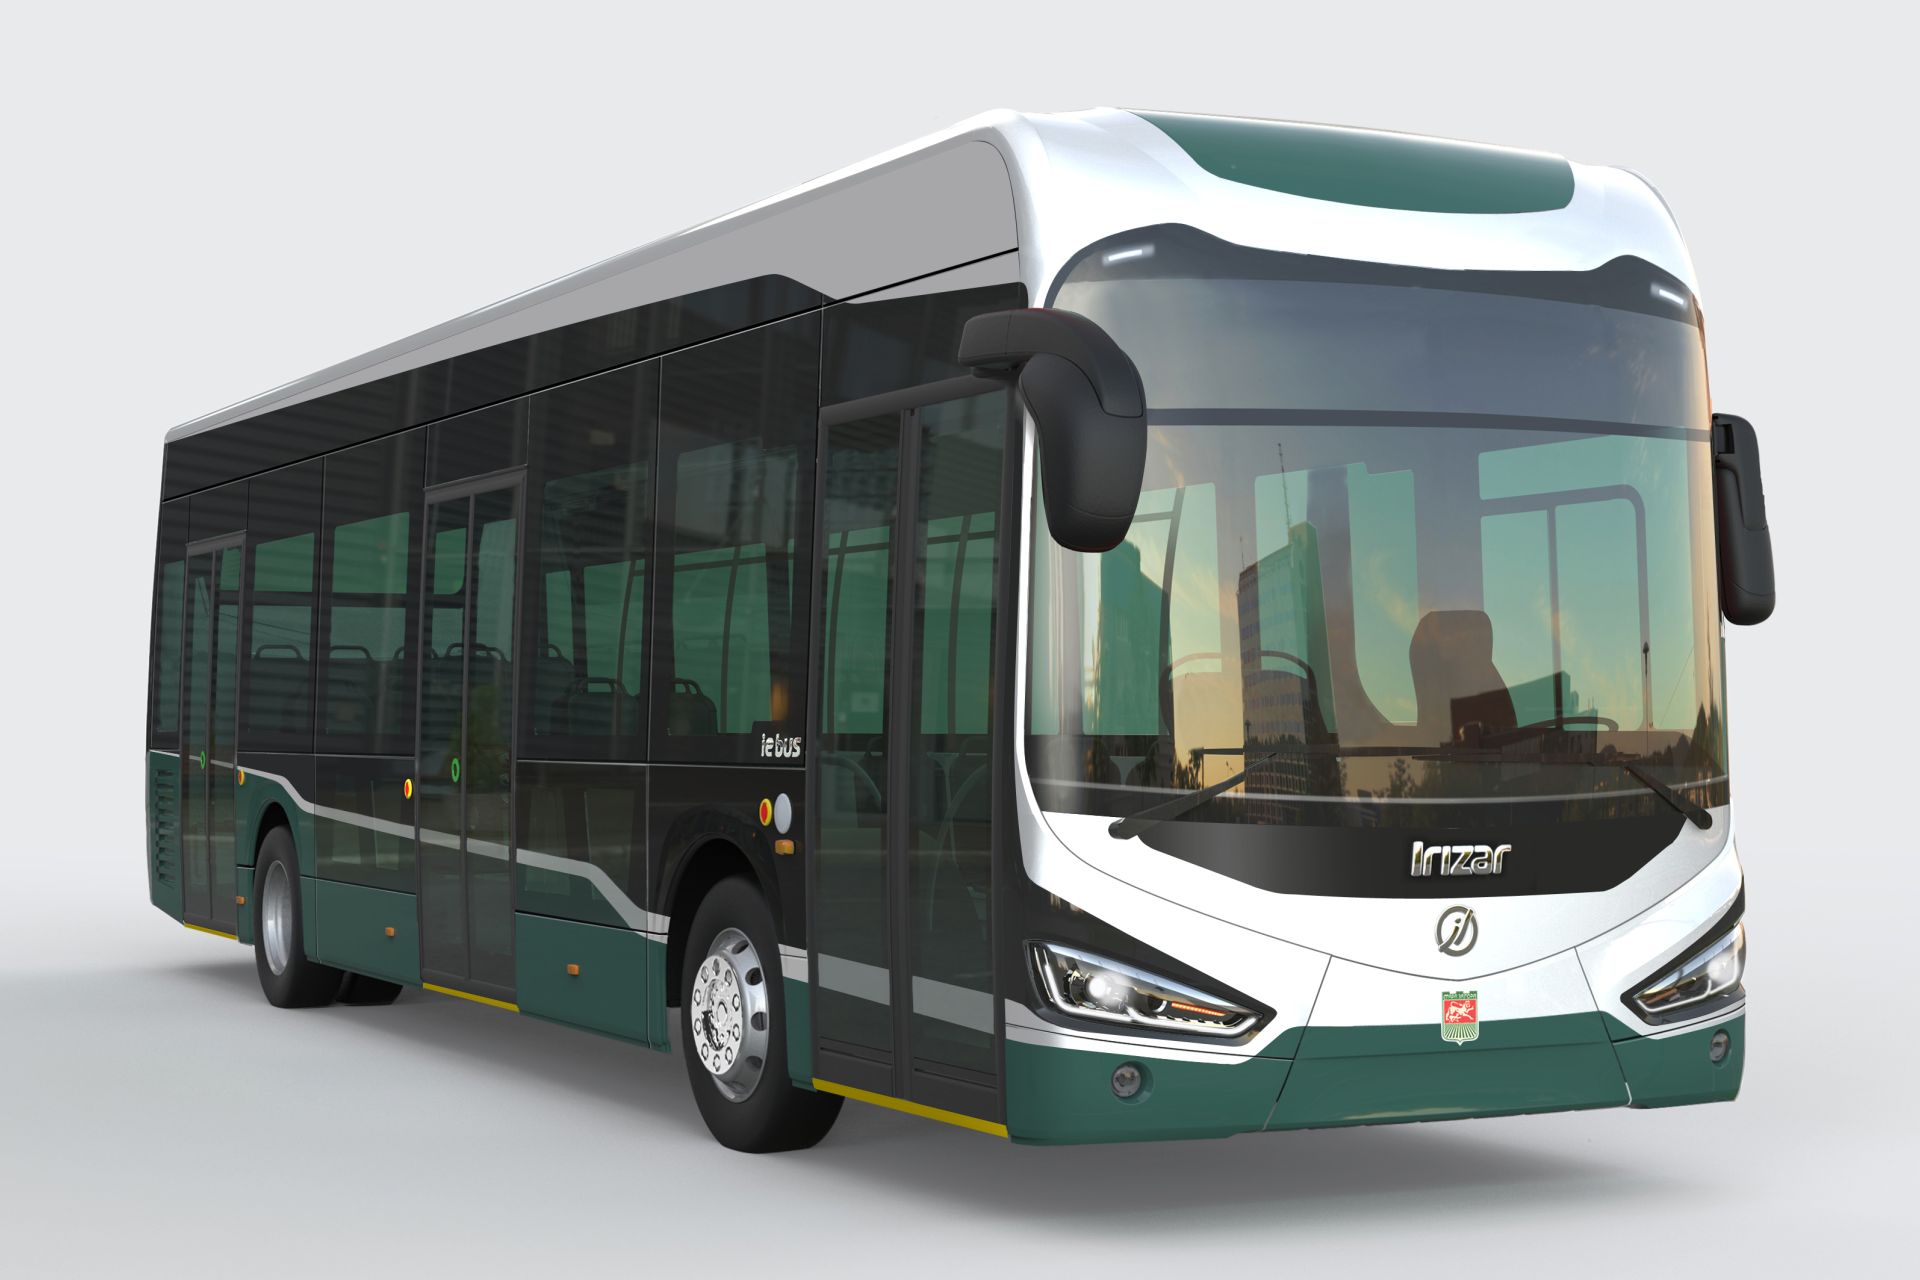 Irizar e-mobility strengthens its position in Bulgaria with a new contract award for Stara Zagora, a city in the centre of the country